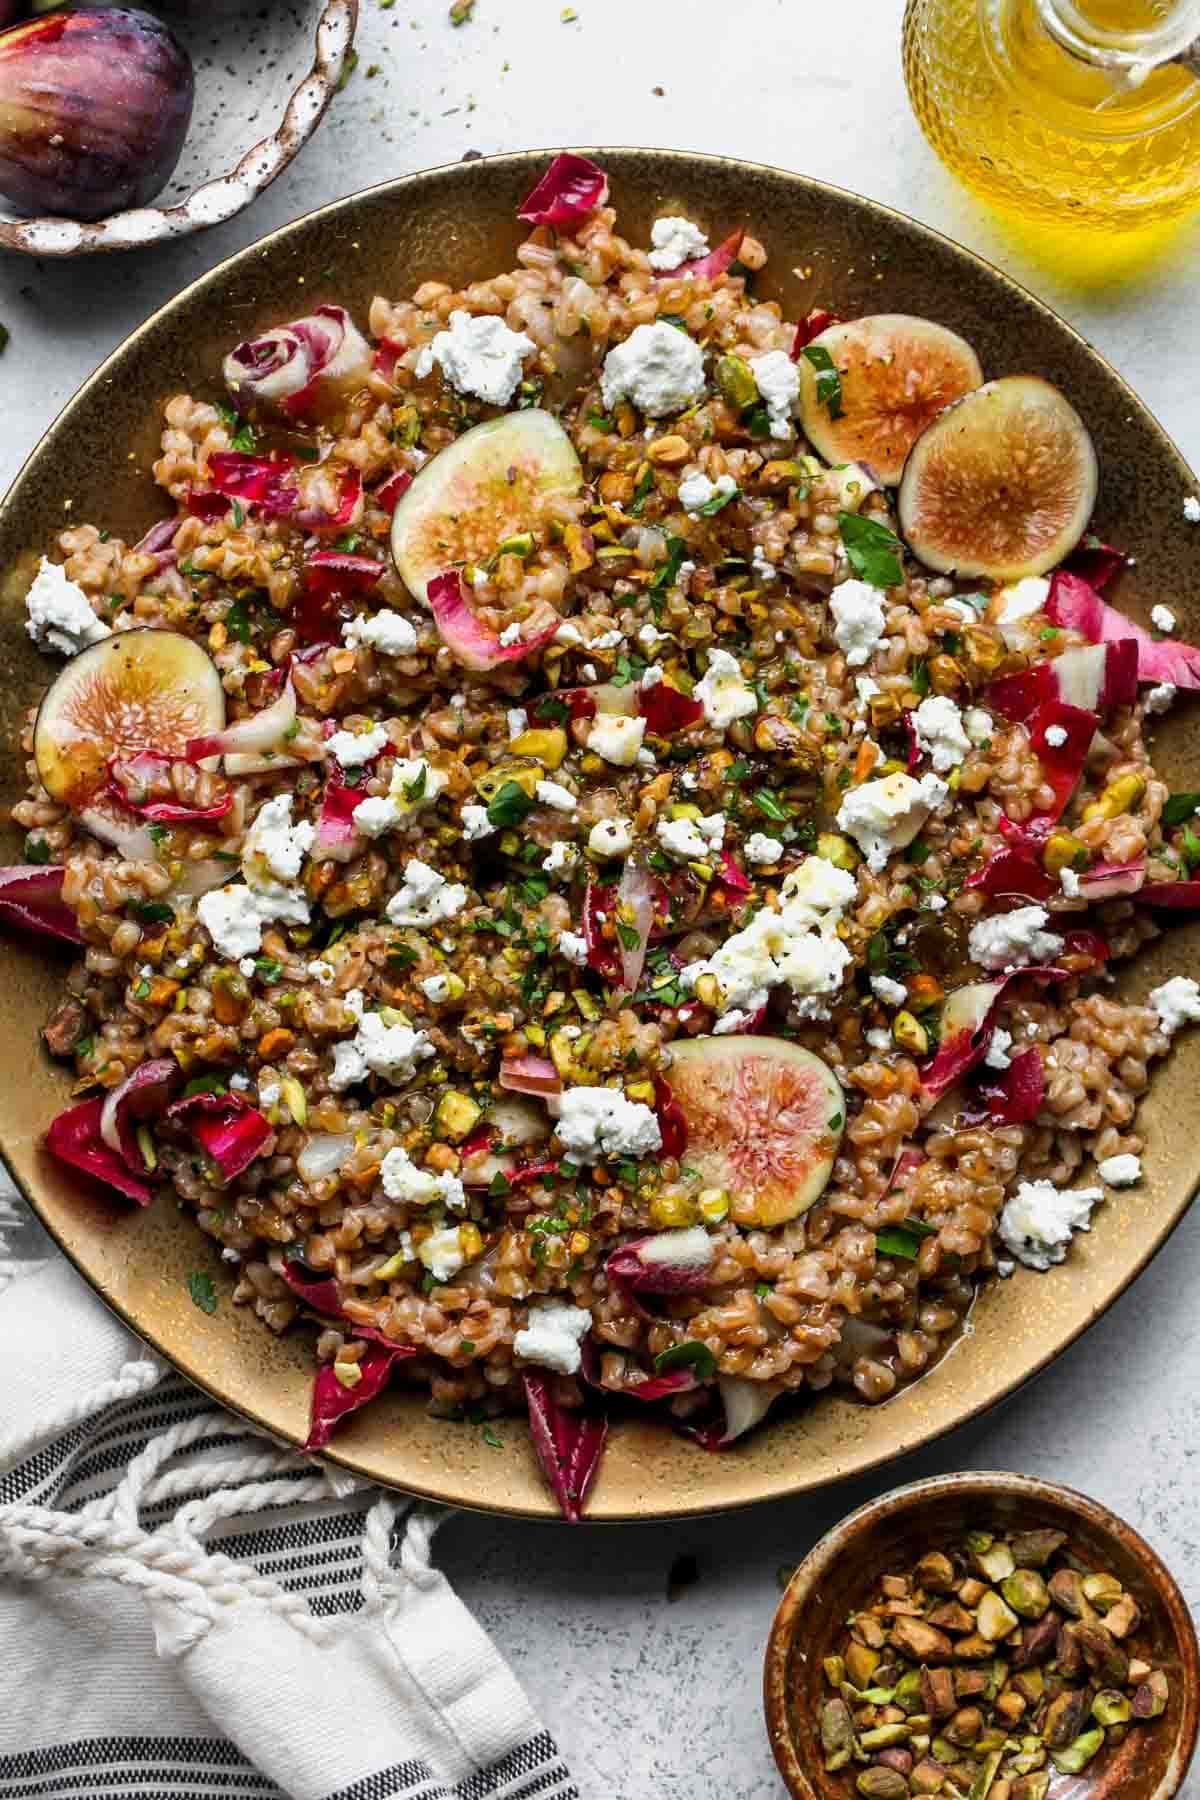 Warm Farro Salad with radicchio, goat cheese, and pistachios with Fig Vinaigrette. 